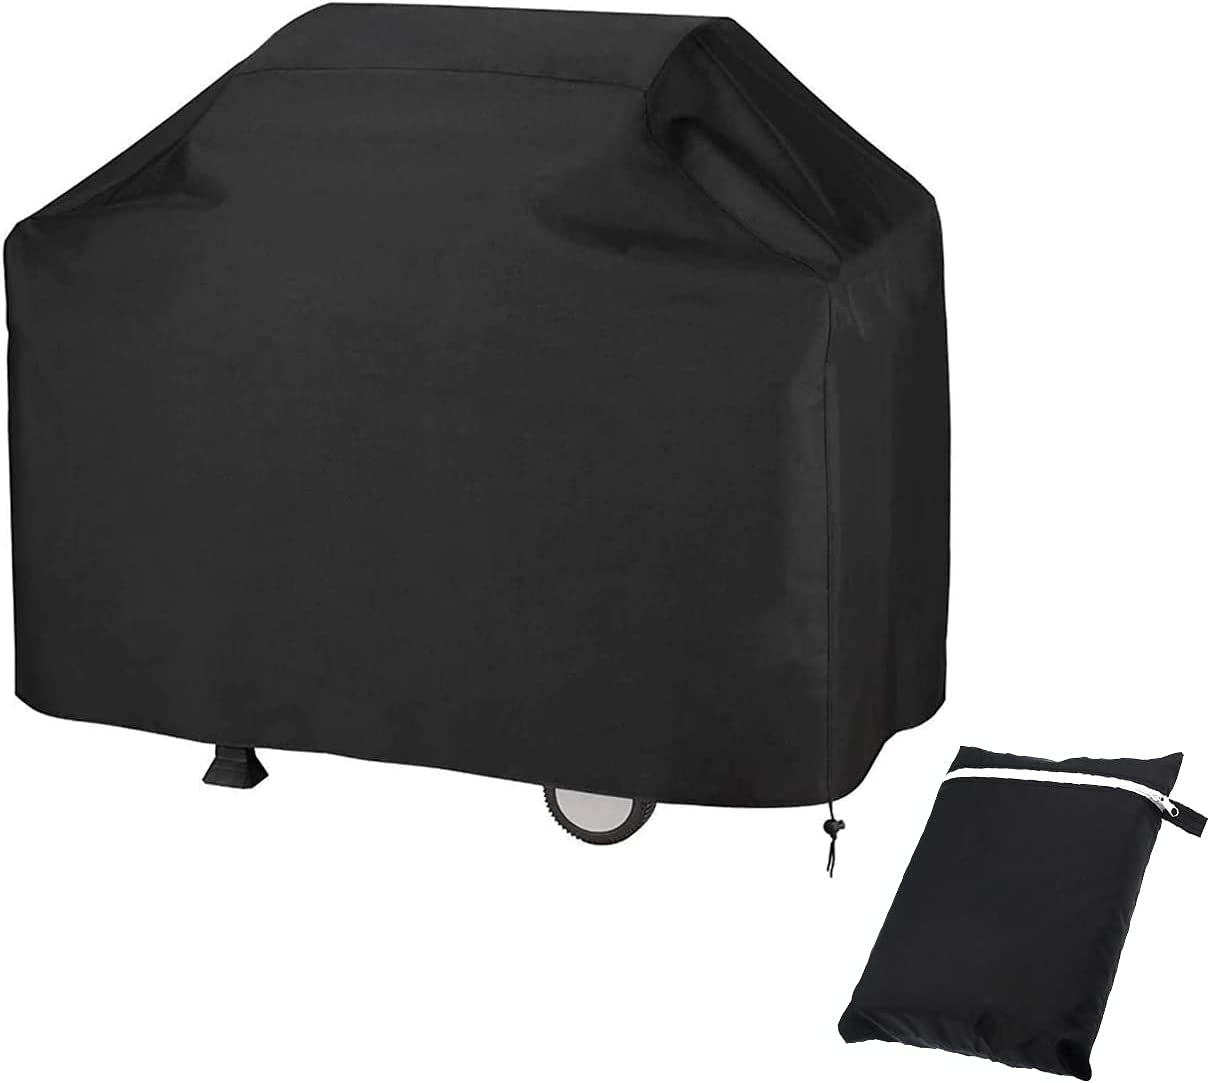 Mayhour, Mayhour 74 Inch Indoor Outdoor BBQ Cover Adjustable Grill Dedicated,Waterproof Gas Grill Cover for Weber, Char-Broil, Brinkmann,Tepro Etc, UV &Dust Resistant Oxford Durable Material (XXL(74"))